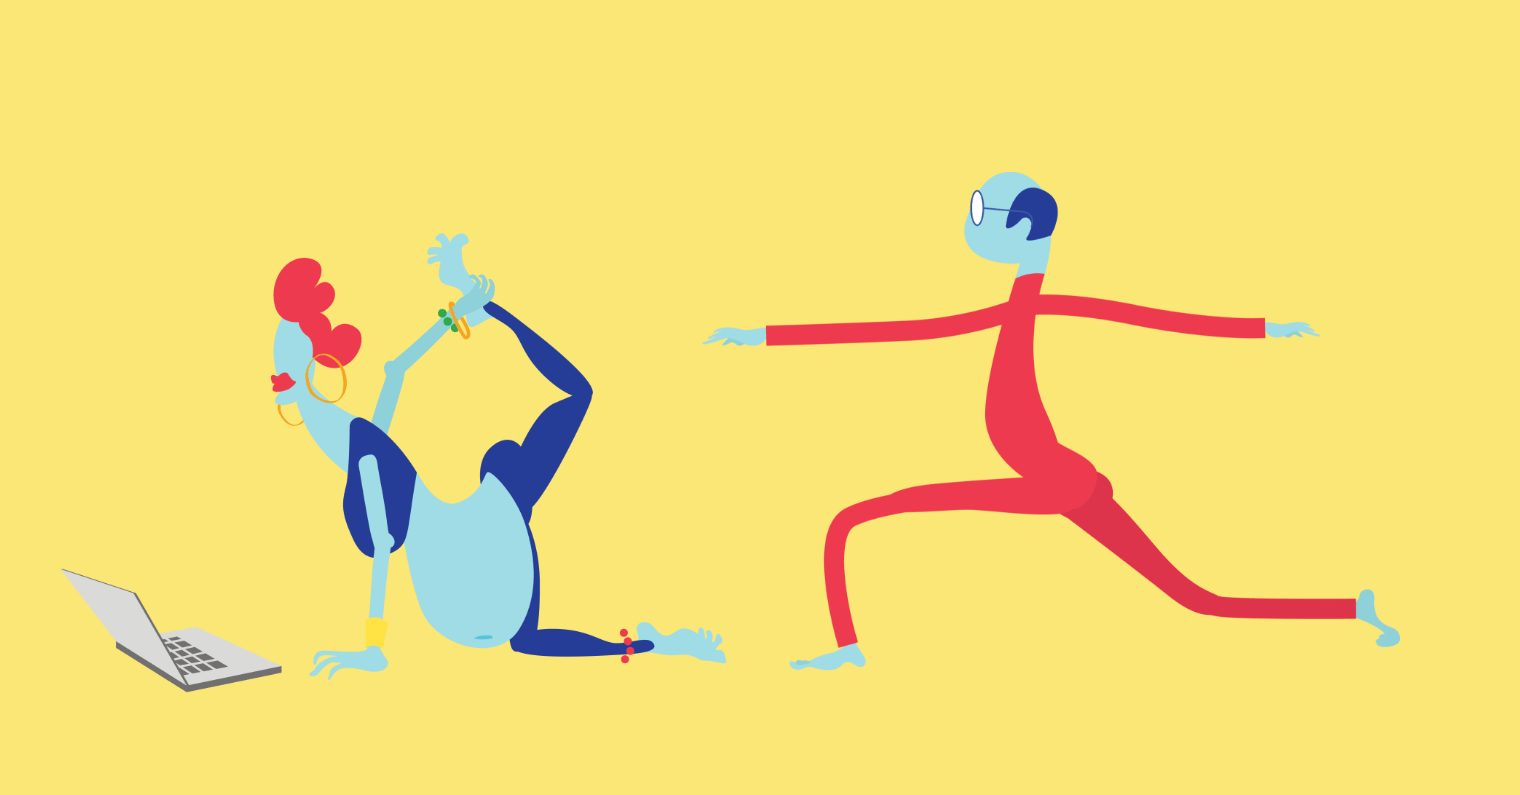 Two illustrated characters using a laptop and exercising